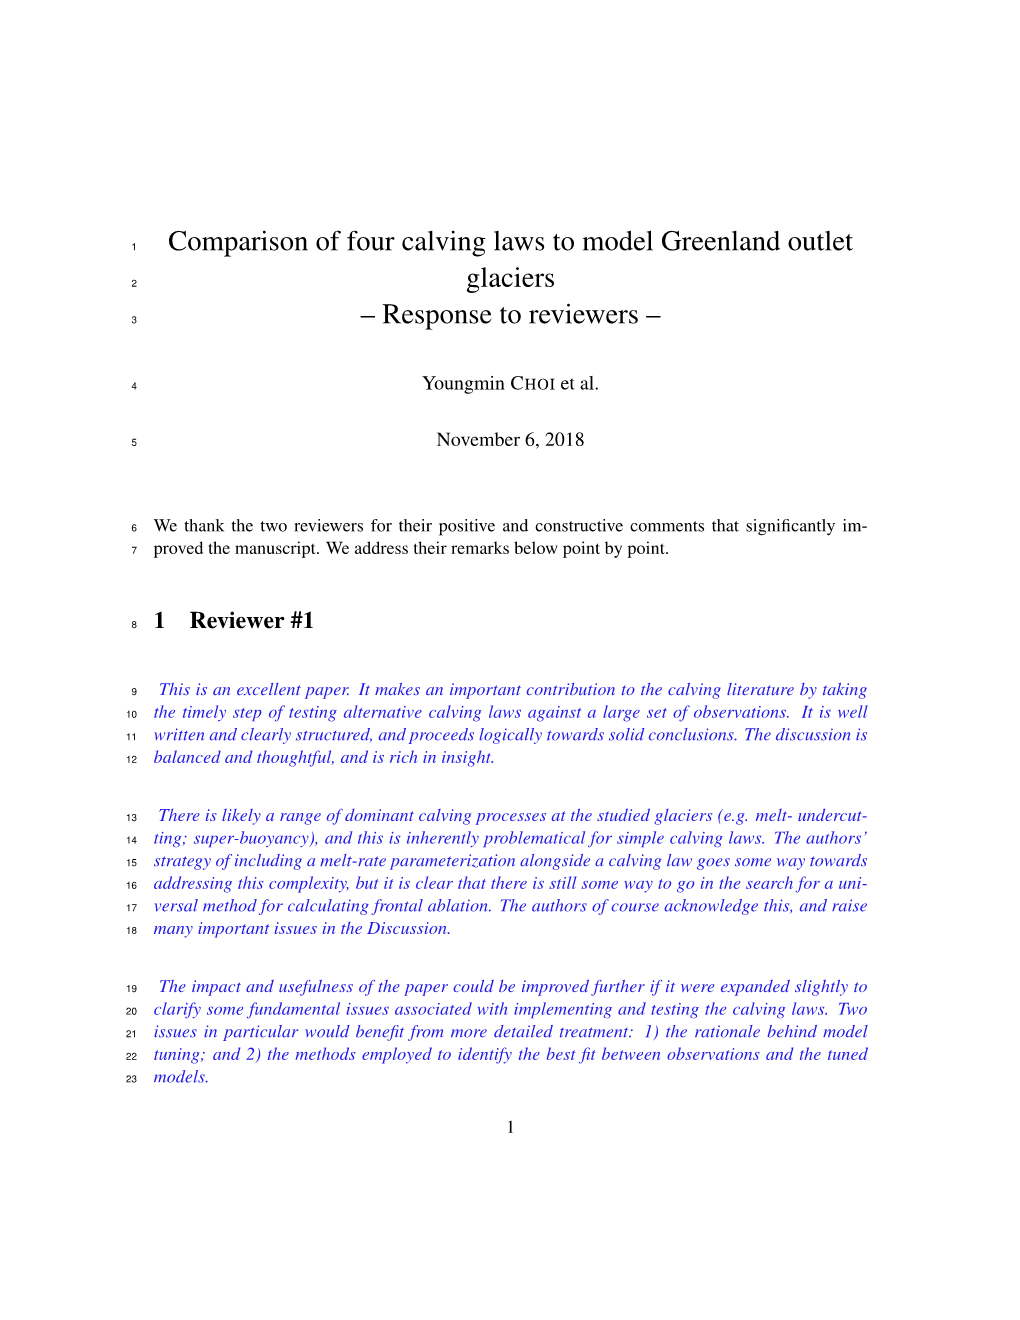 Comparison of Four Calving Laws to Model Greenland Outlet Glaciers Youngmin Choi1, Mathieu Morlighem1, Michael Wood1, and Johannes H